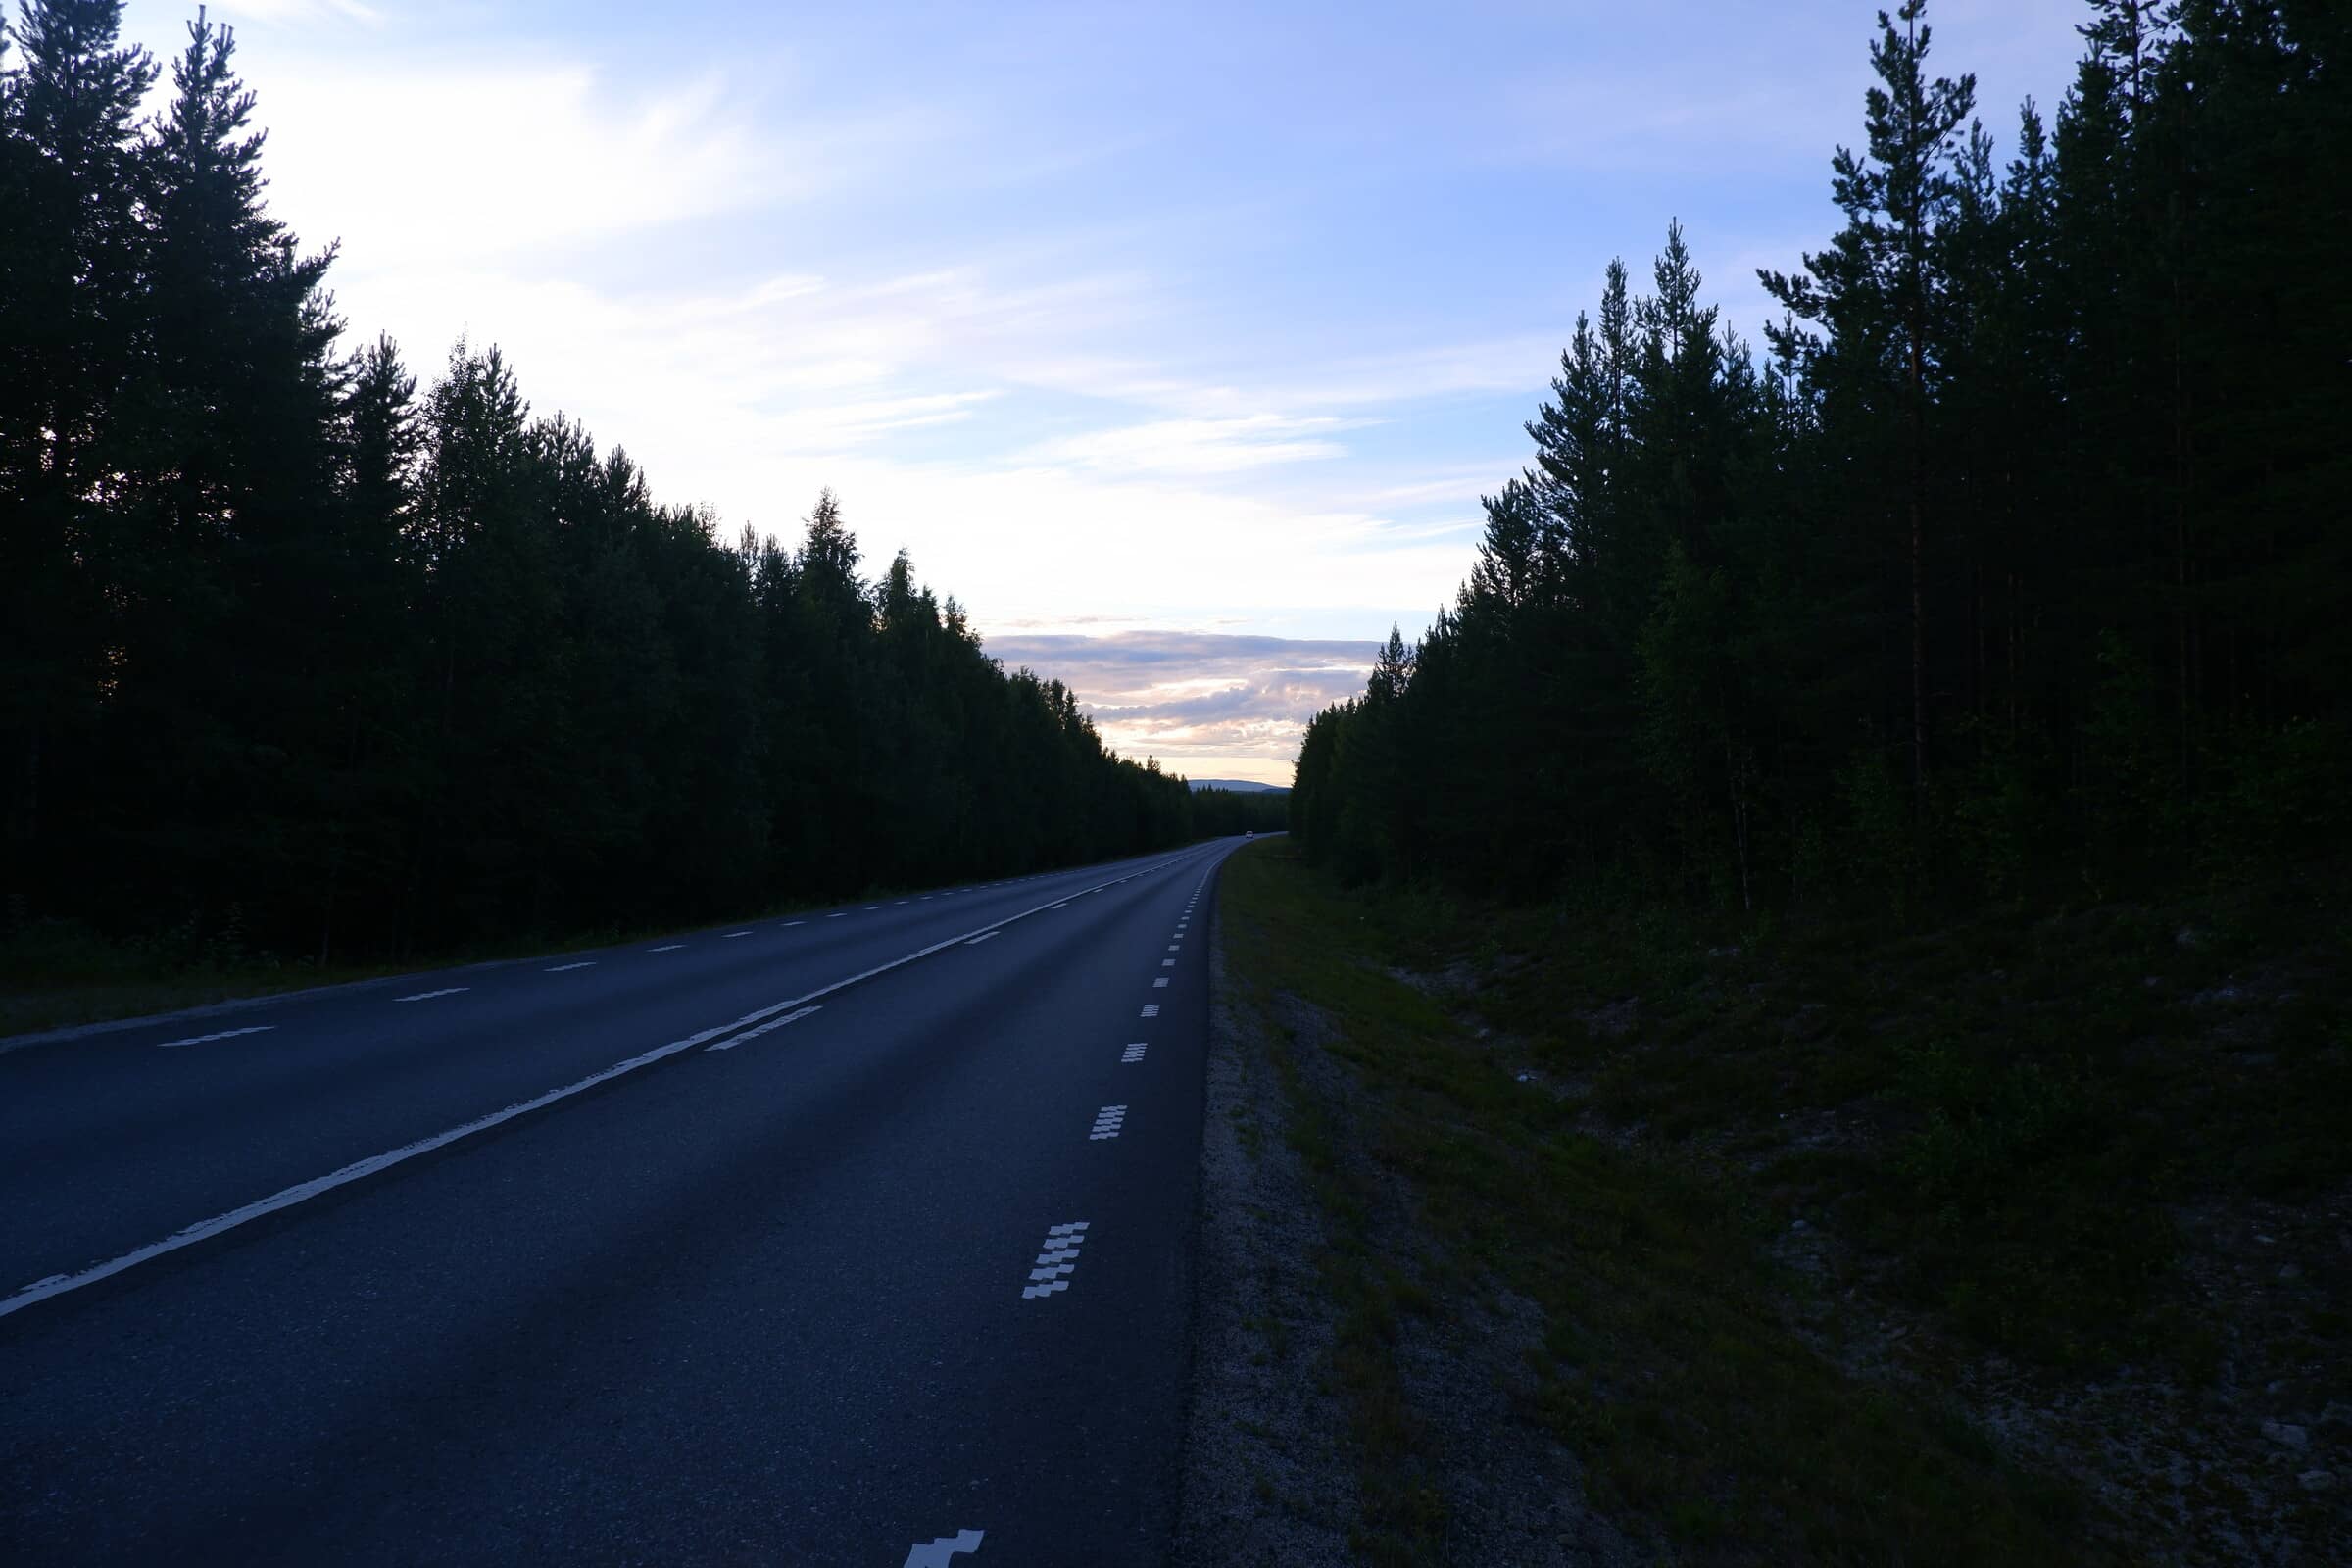 A long stretch of straight road with dense forest on the sides. The sun is coming down.